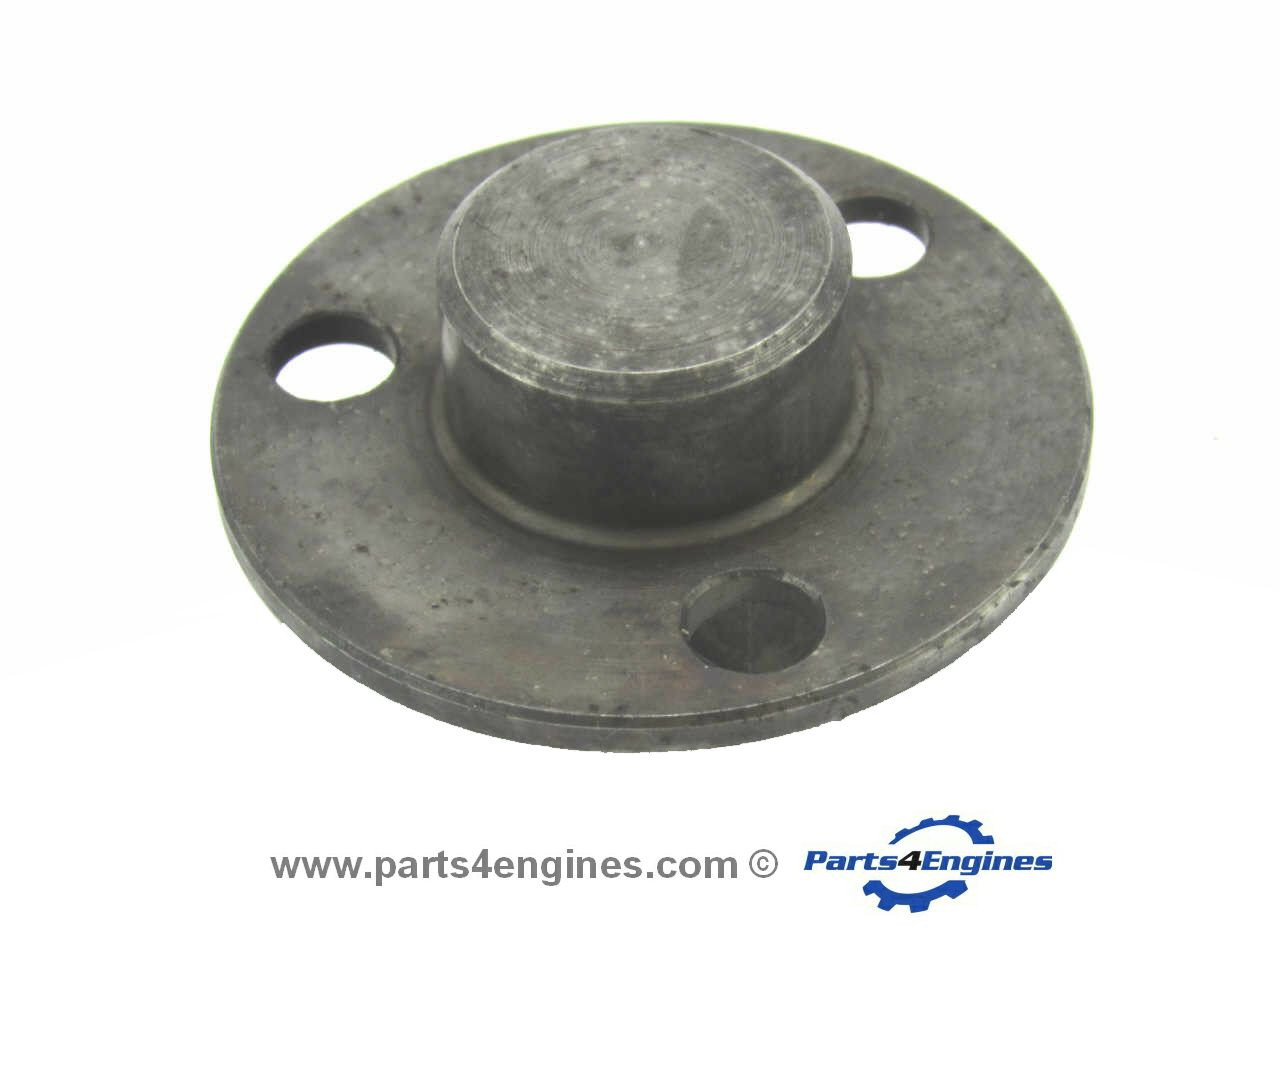 Volvo Penta MD22 Raw water pump drive coupling from Parts4Engines.com